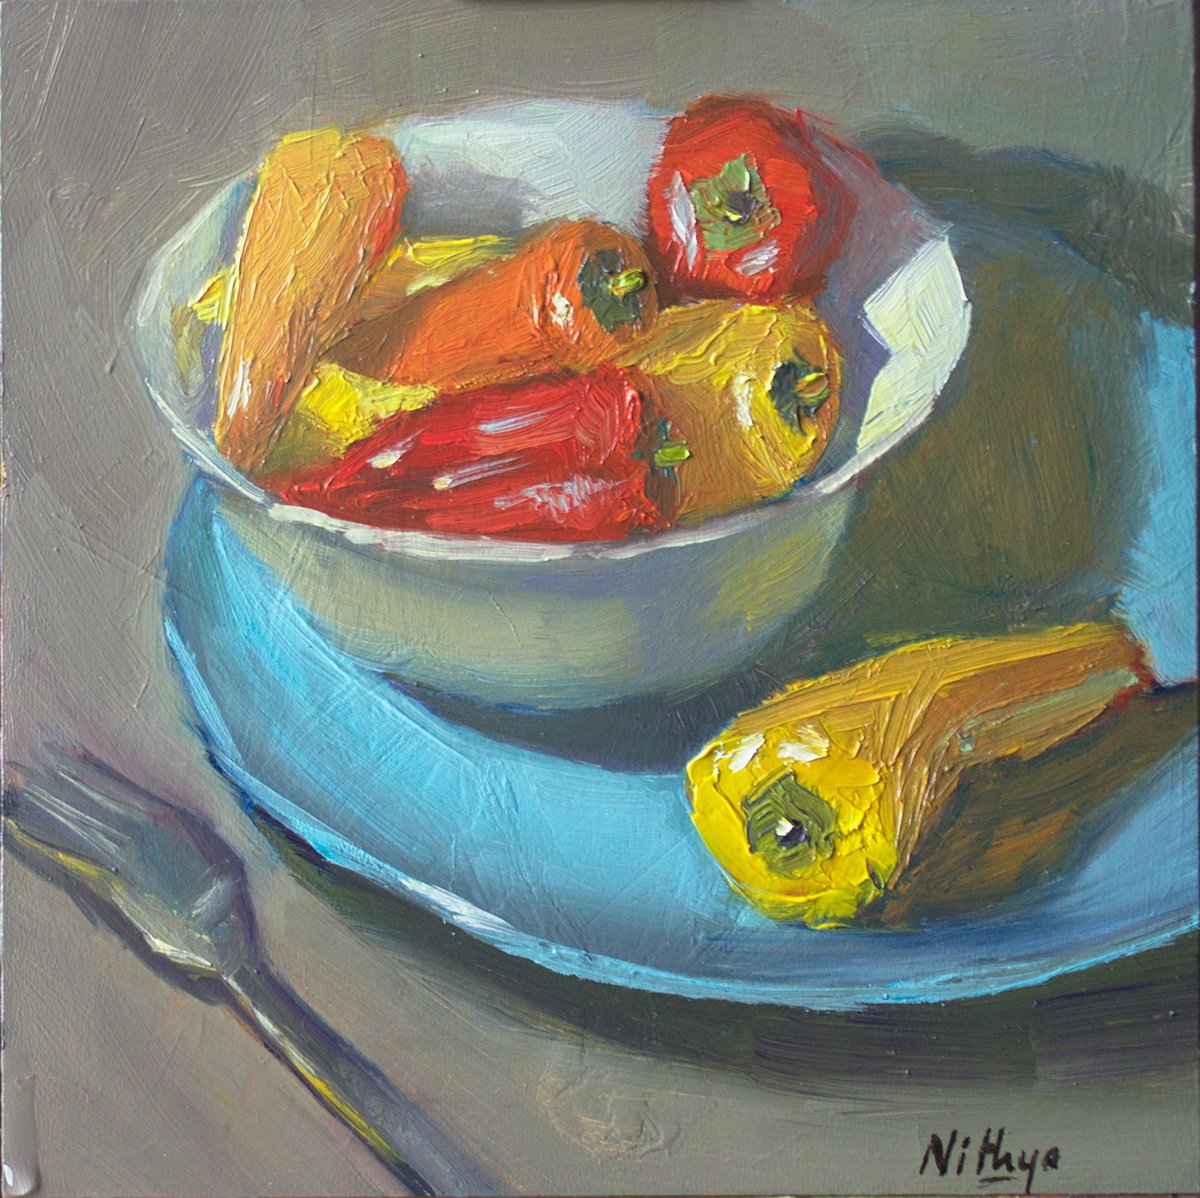 Small Painting - Peppers in a bowl! - Kitchen Decor, Home Decor by Nithya Swaminathan